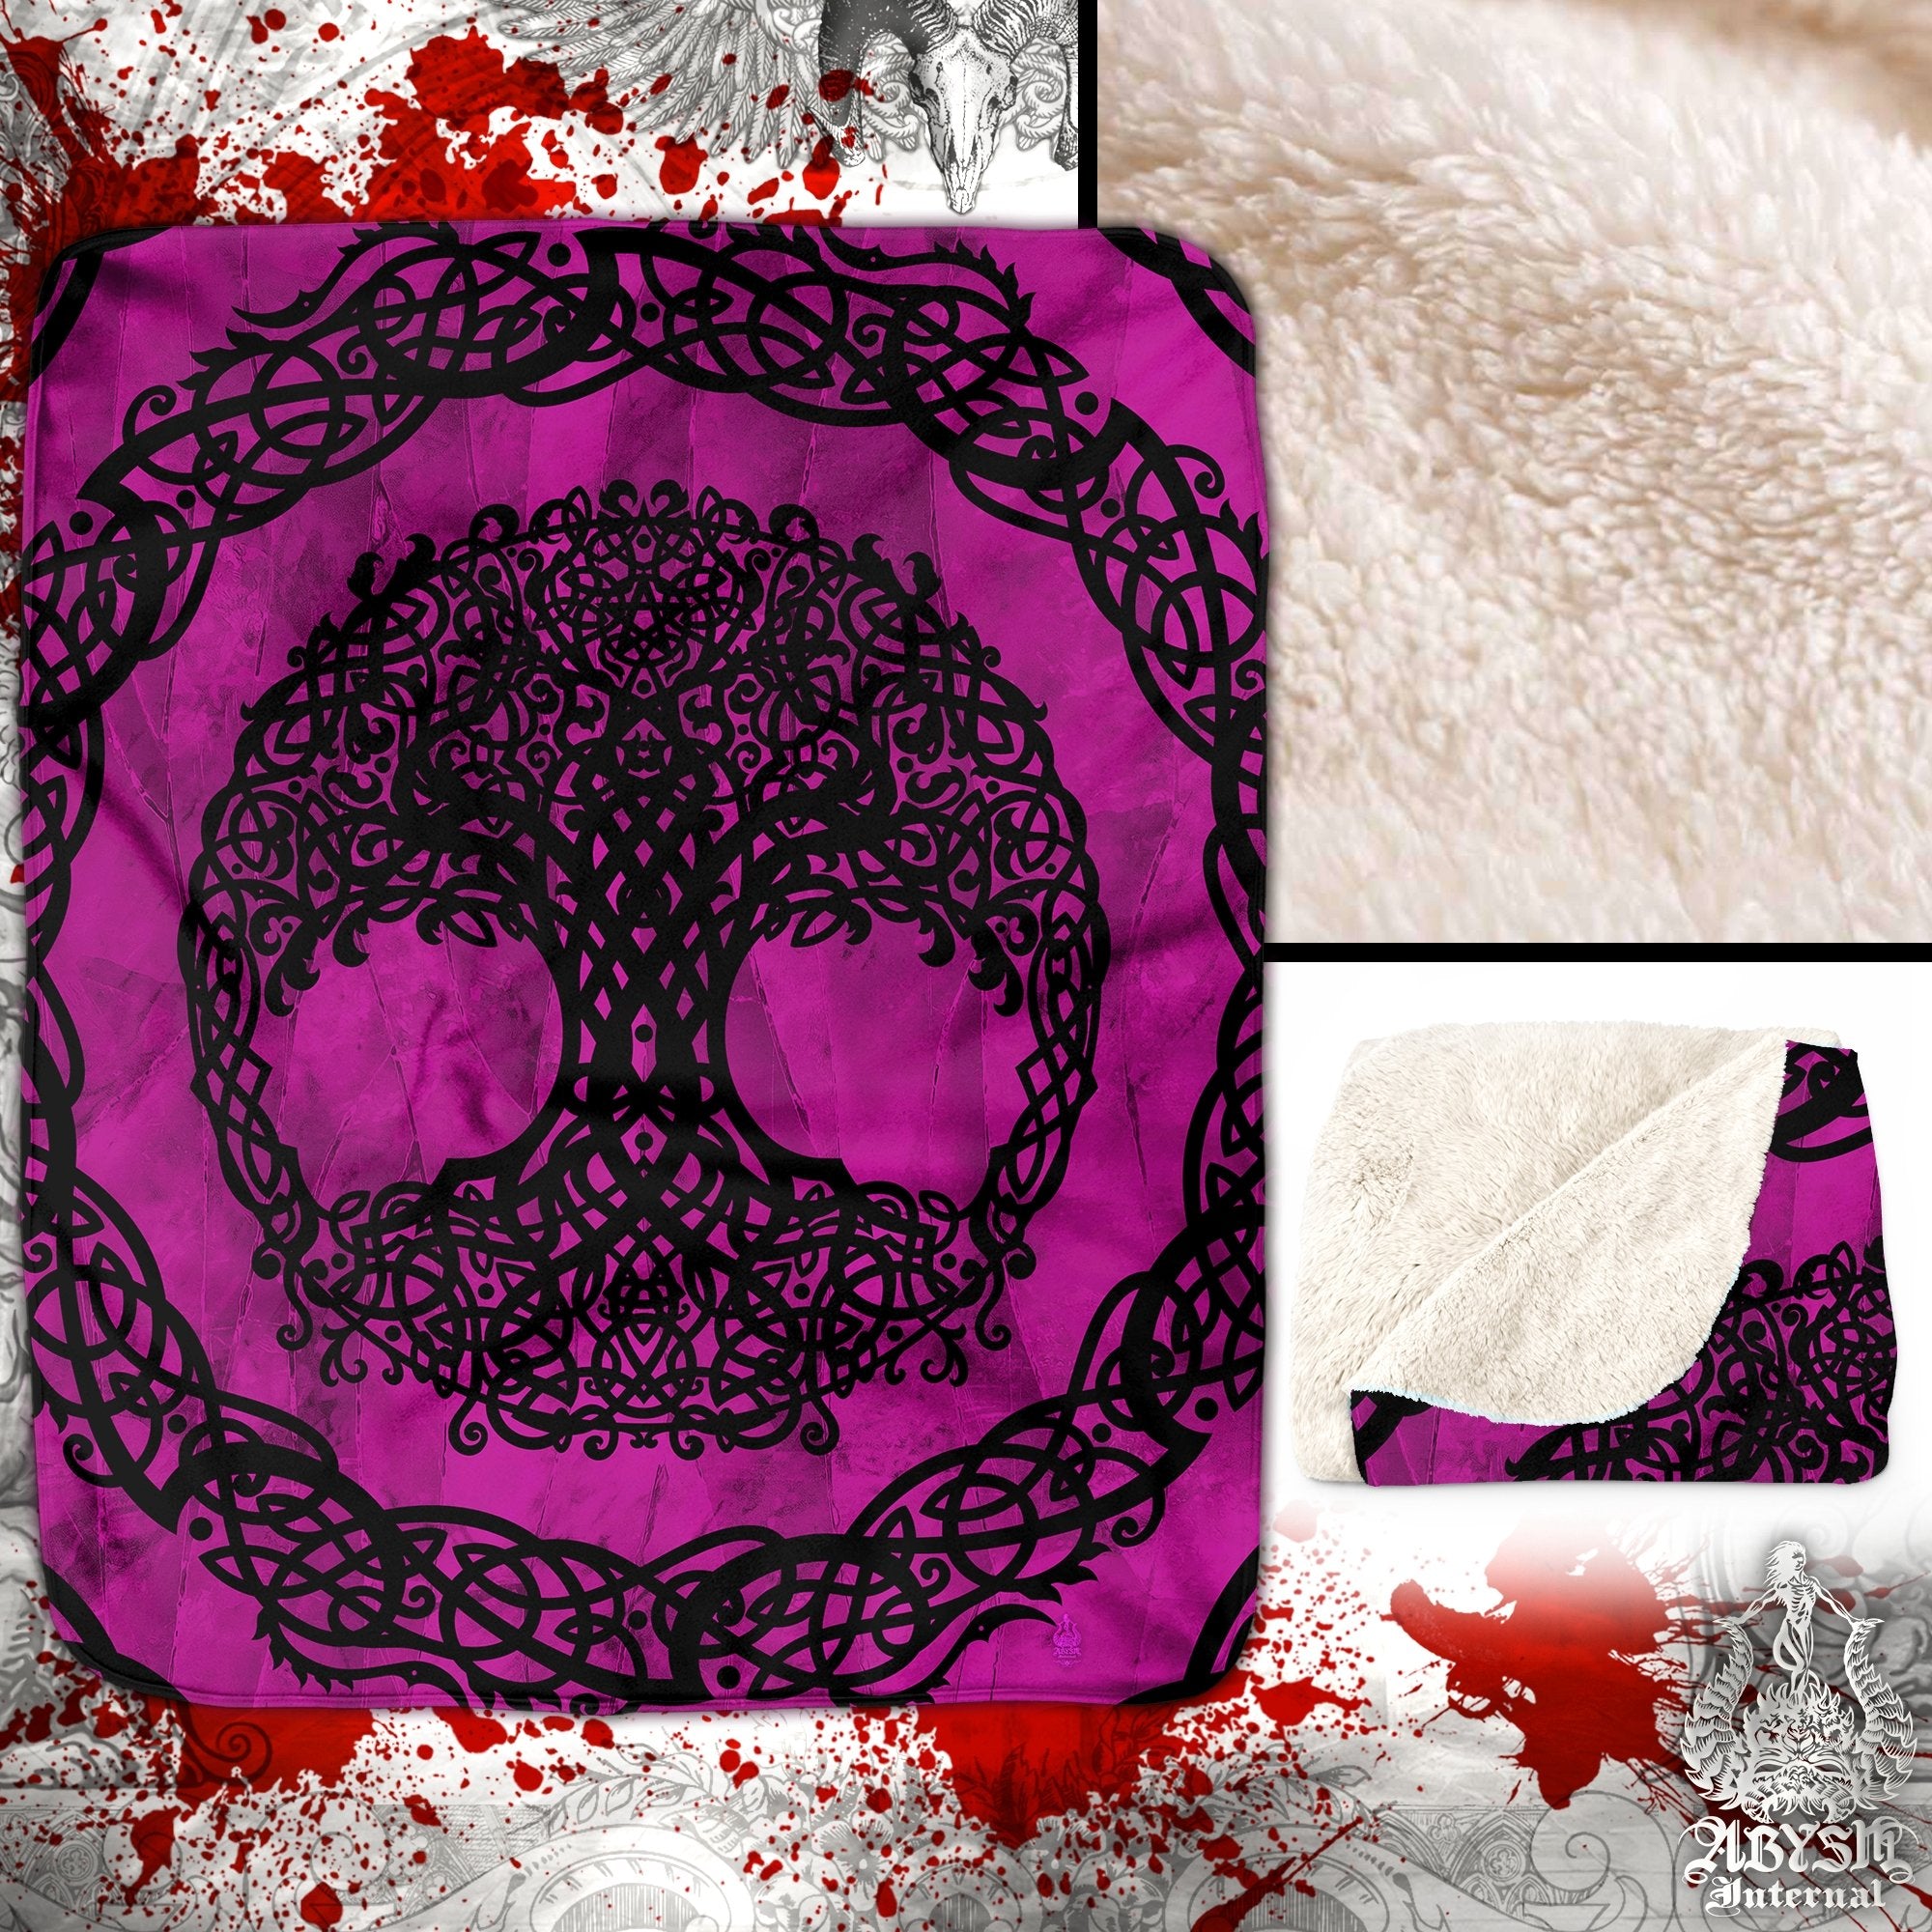 Witchy Throw Fleece Blanket, Pagan Decor, Celtic Tree of Life , Witch Room, Witch Gift, Alternative Art Gift - Pink and Black - Abysm Internal